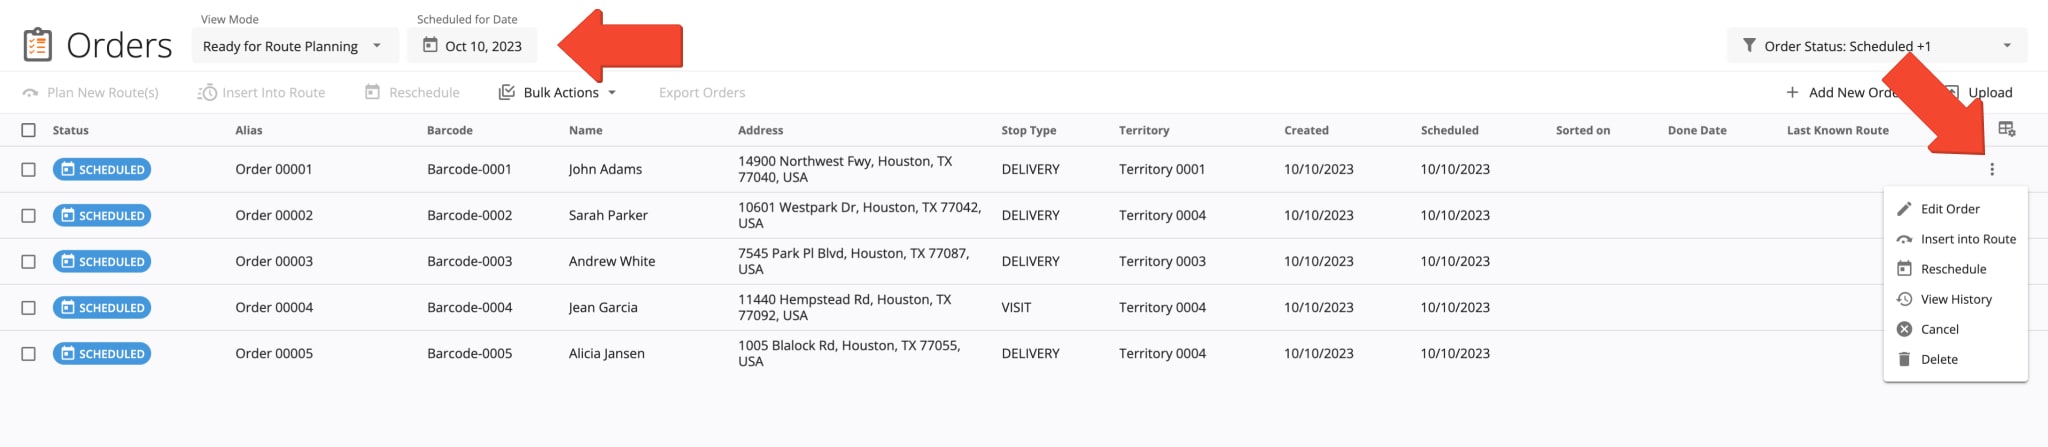 Manage orders in Route4Me's Orders List: reschedule, cancel, delete, edit, view order history, and more.